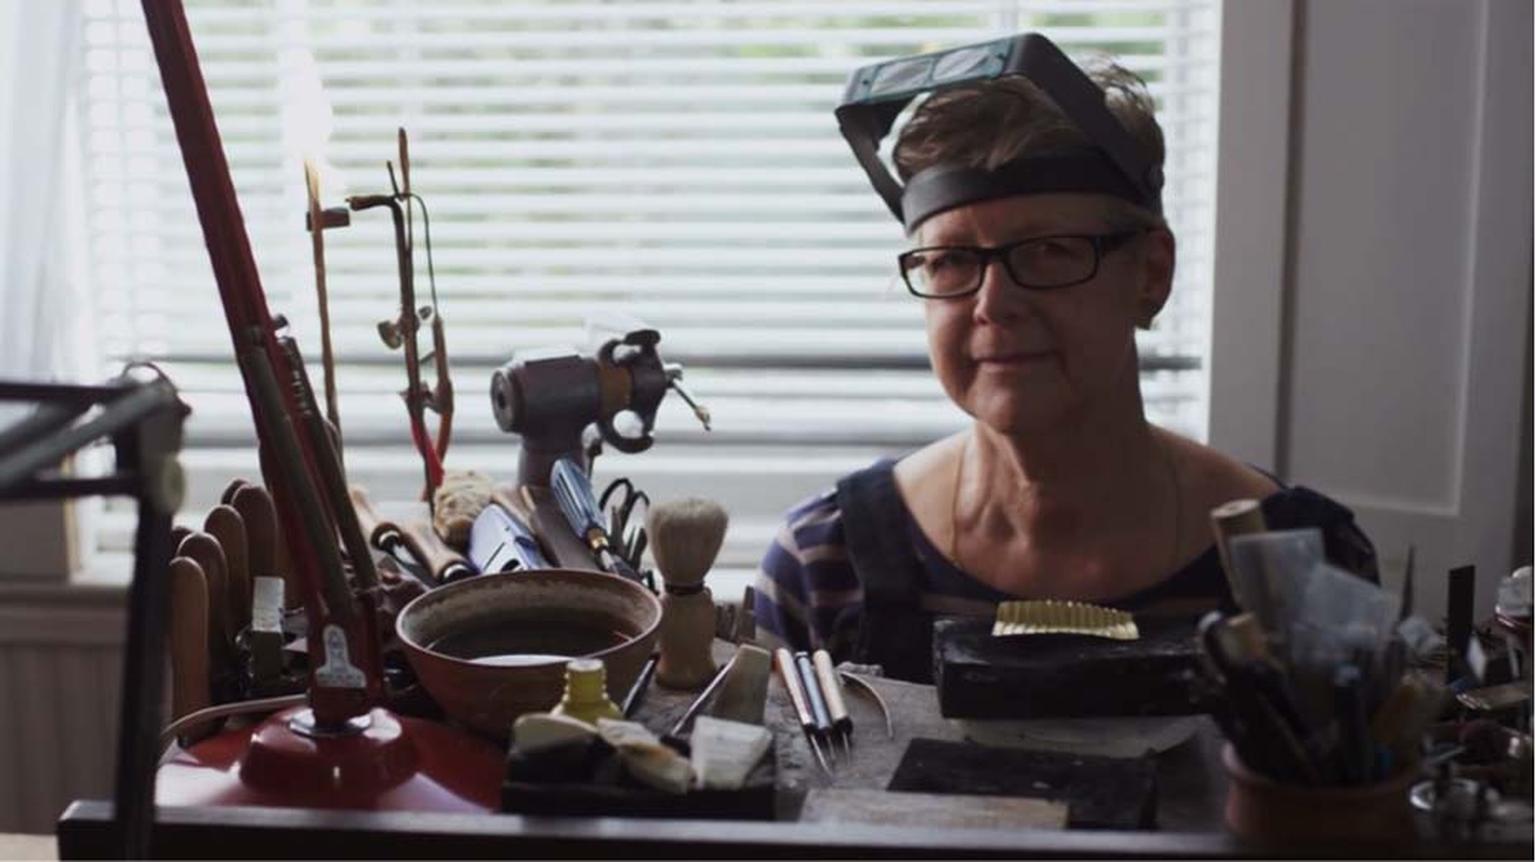 Jacqueline Mina has received numerous awards, including the prestigious Jerwood Prize for Applied Arts - Jewellery in 2000.